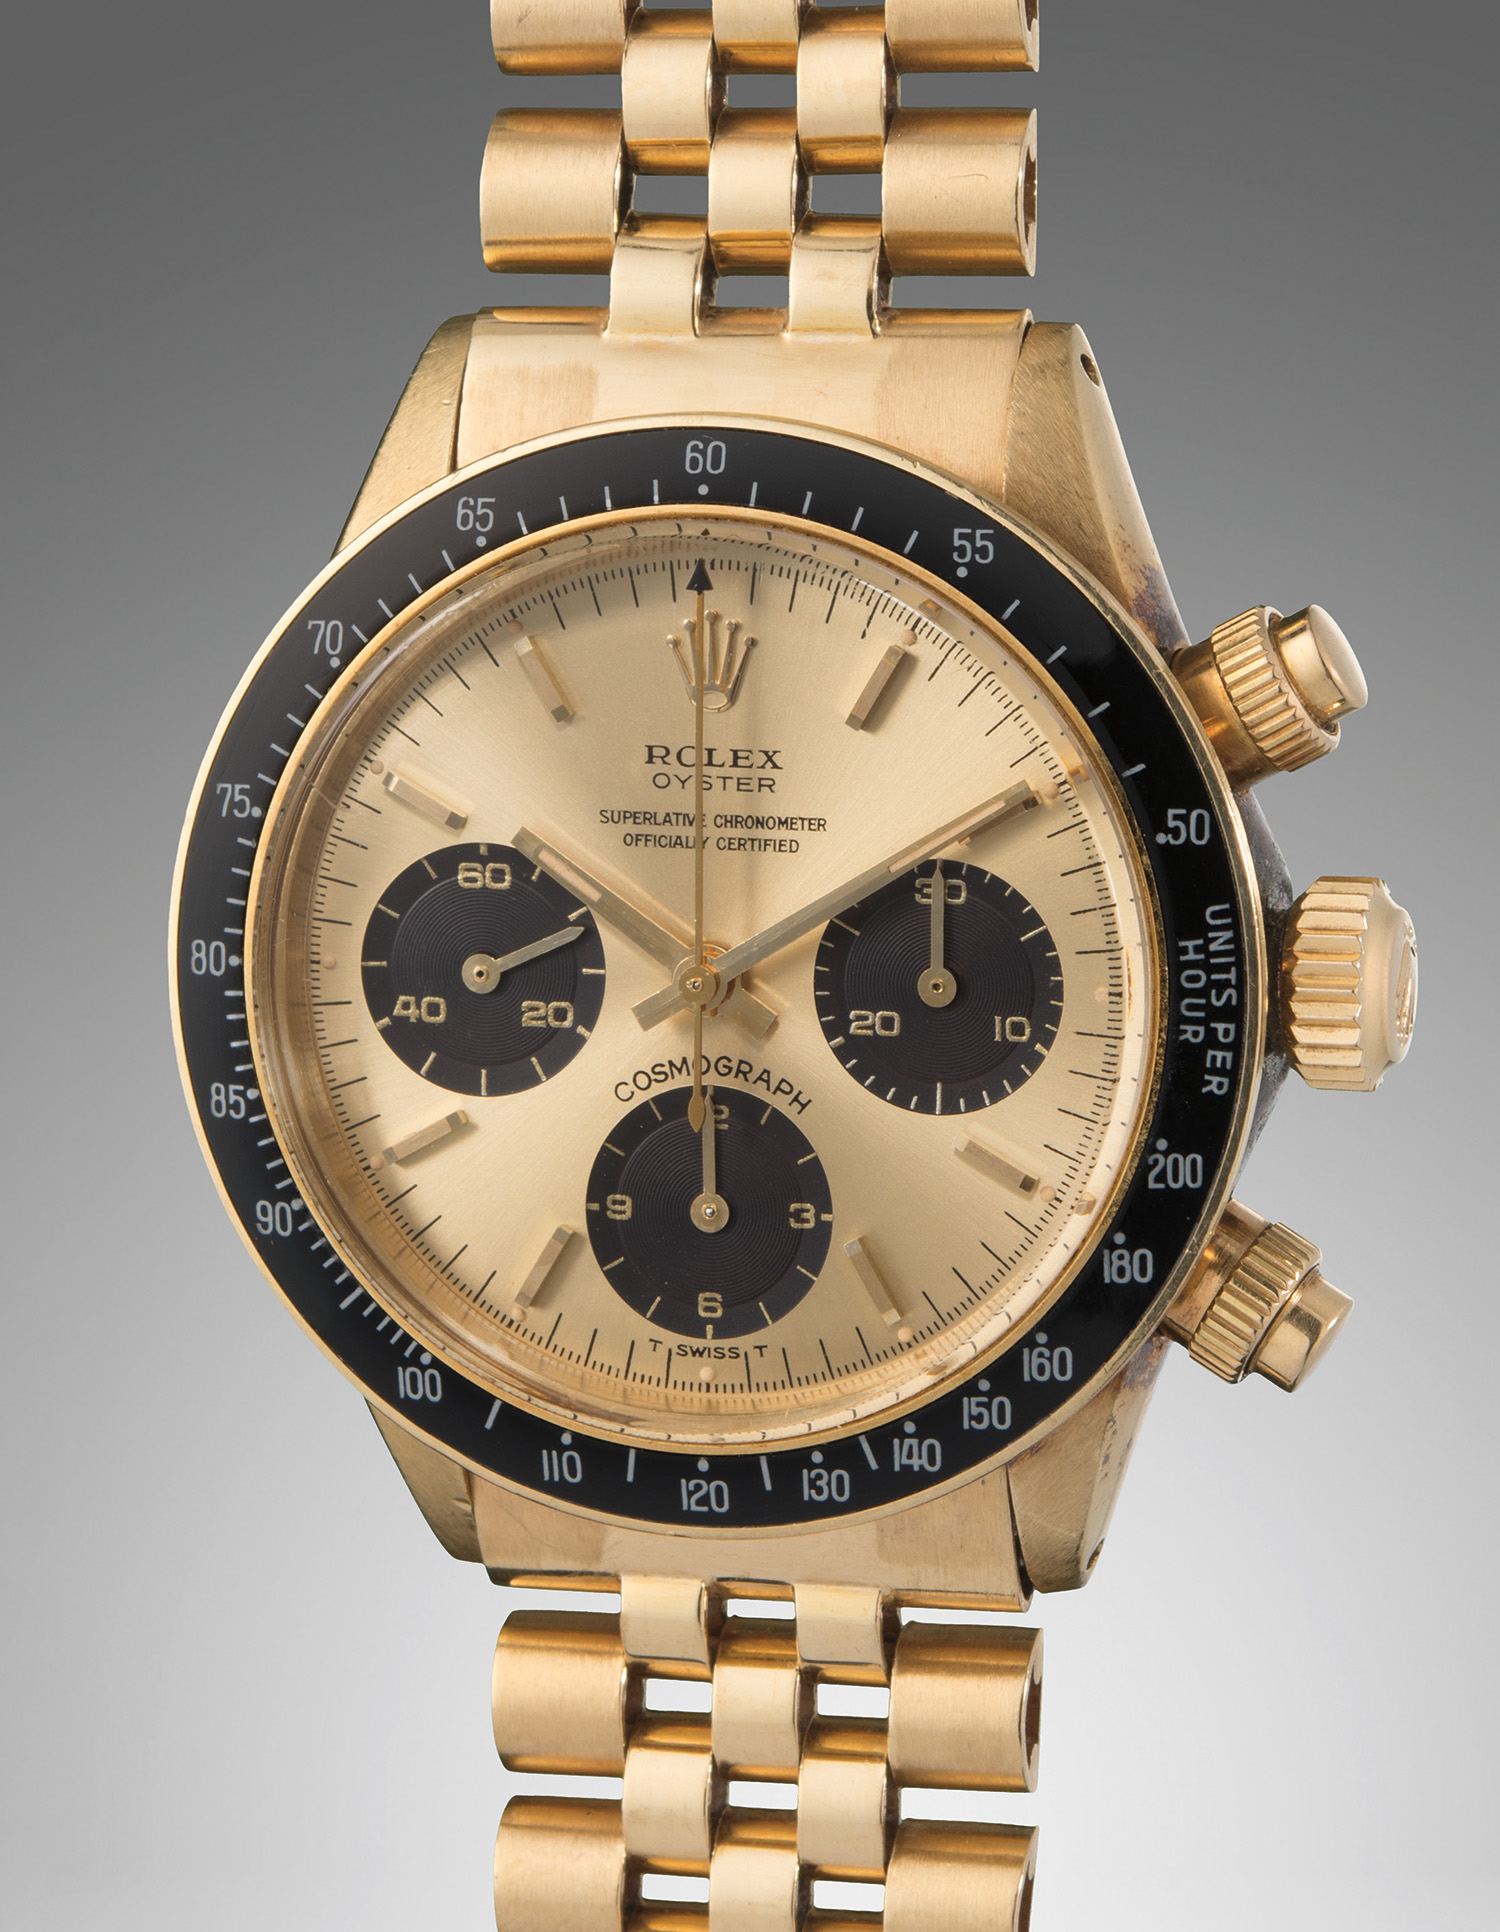 An important yellow gold chronograph wristwatch with a champagne dial displaying “Oyster” designation and “floating scripts”, sold for $225,000.